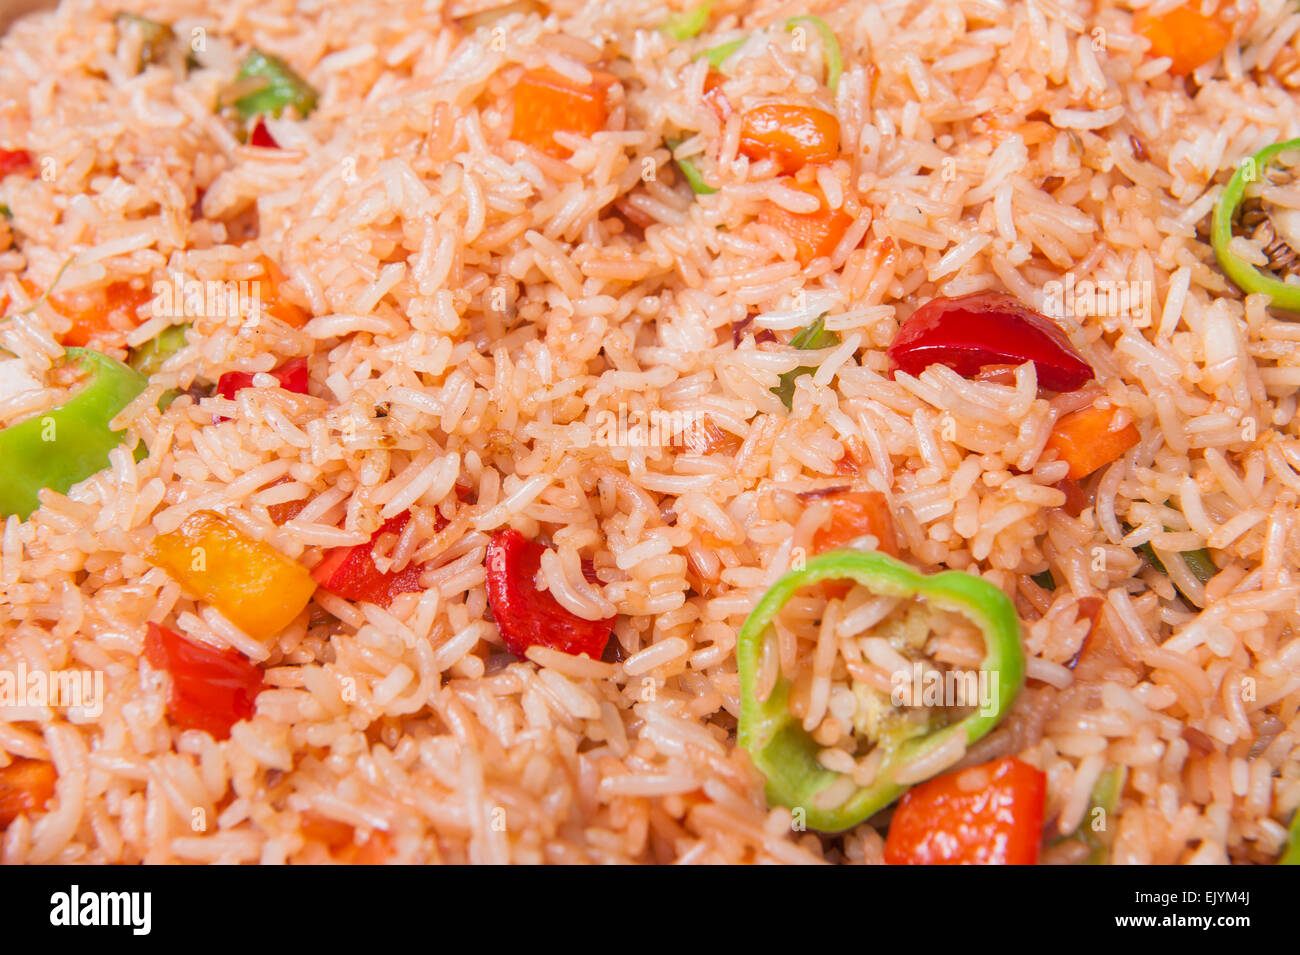 Closeup of chinese vegetable fried rice on display at a hotel restaurant buffet Stock Photo